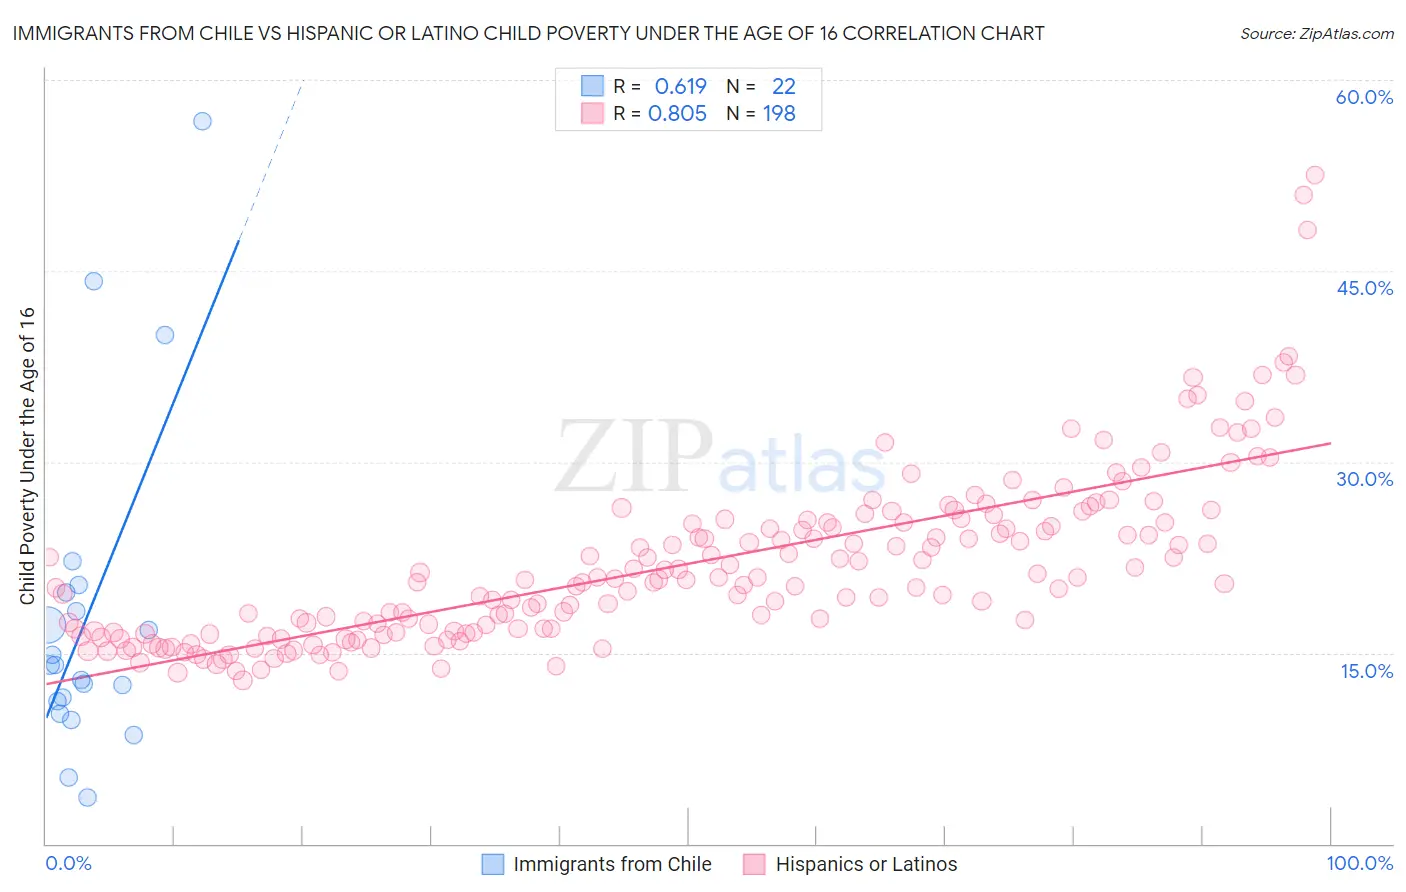 Immigrants from Chile vs Hispanic or Latino Child Poverty Under the Age of 16